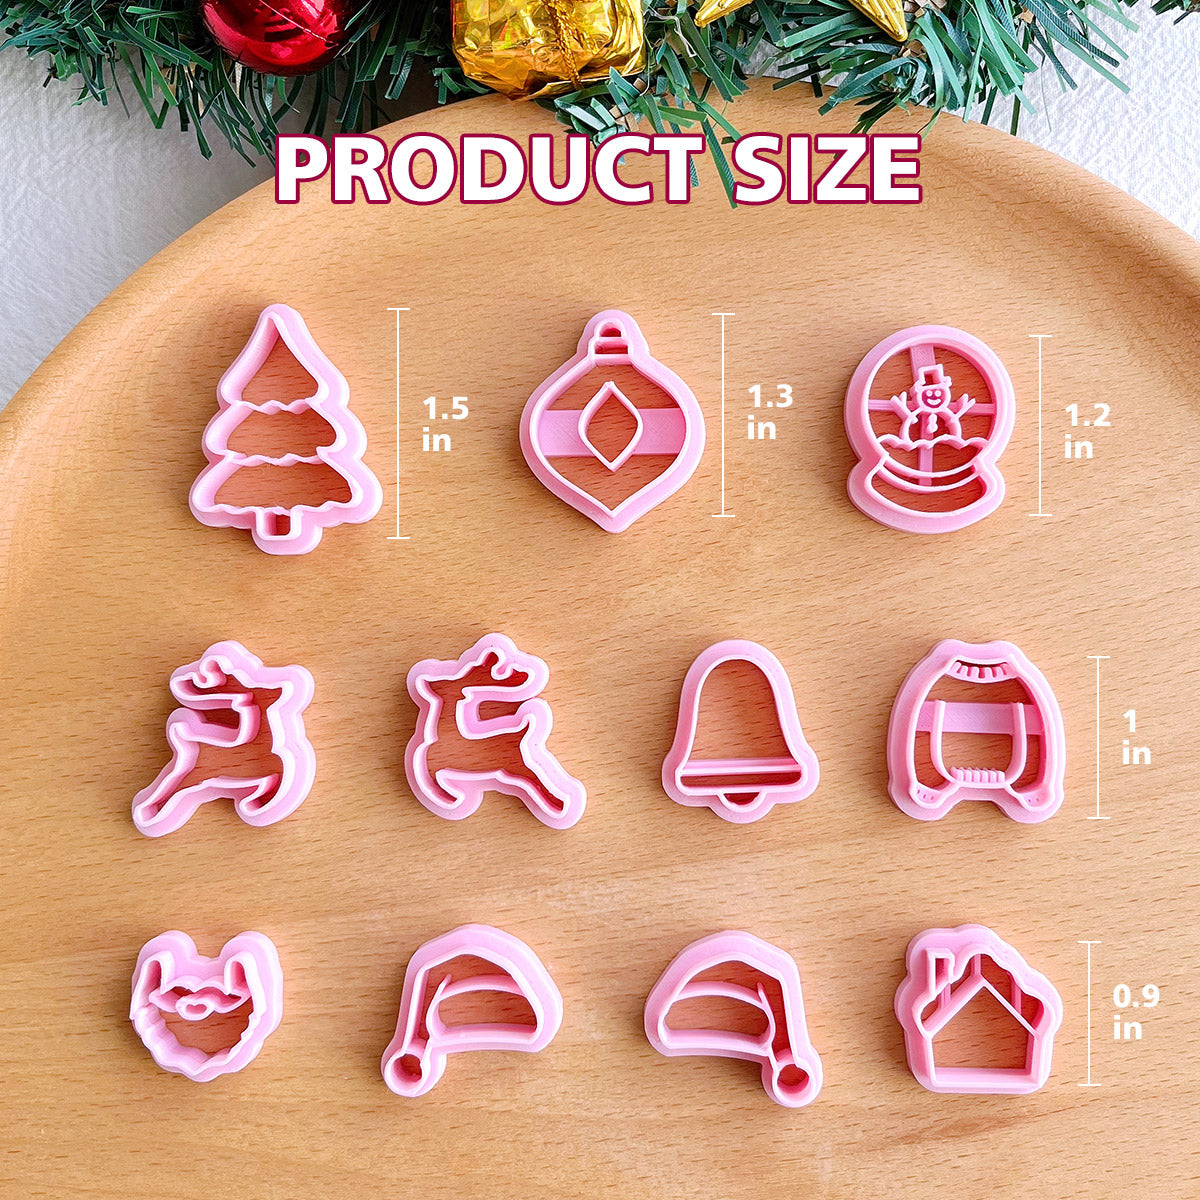 KEOKER Christmas Polymer Clay Cutters (21 Shapes）